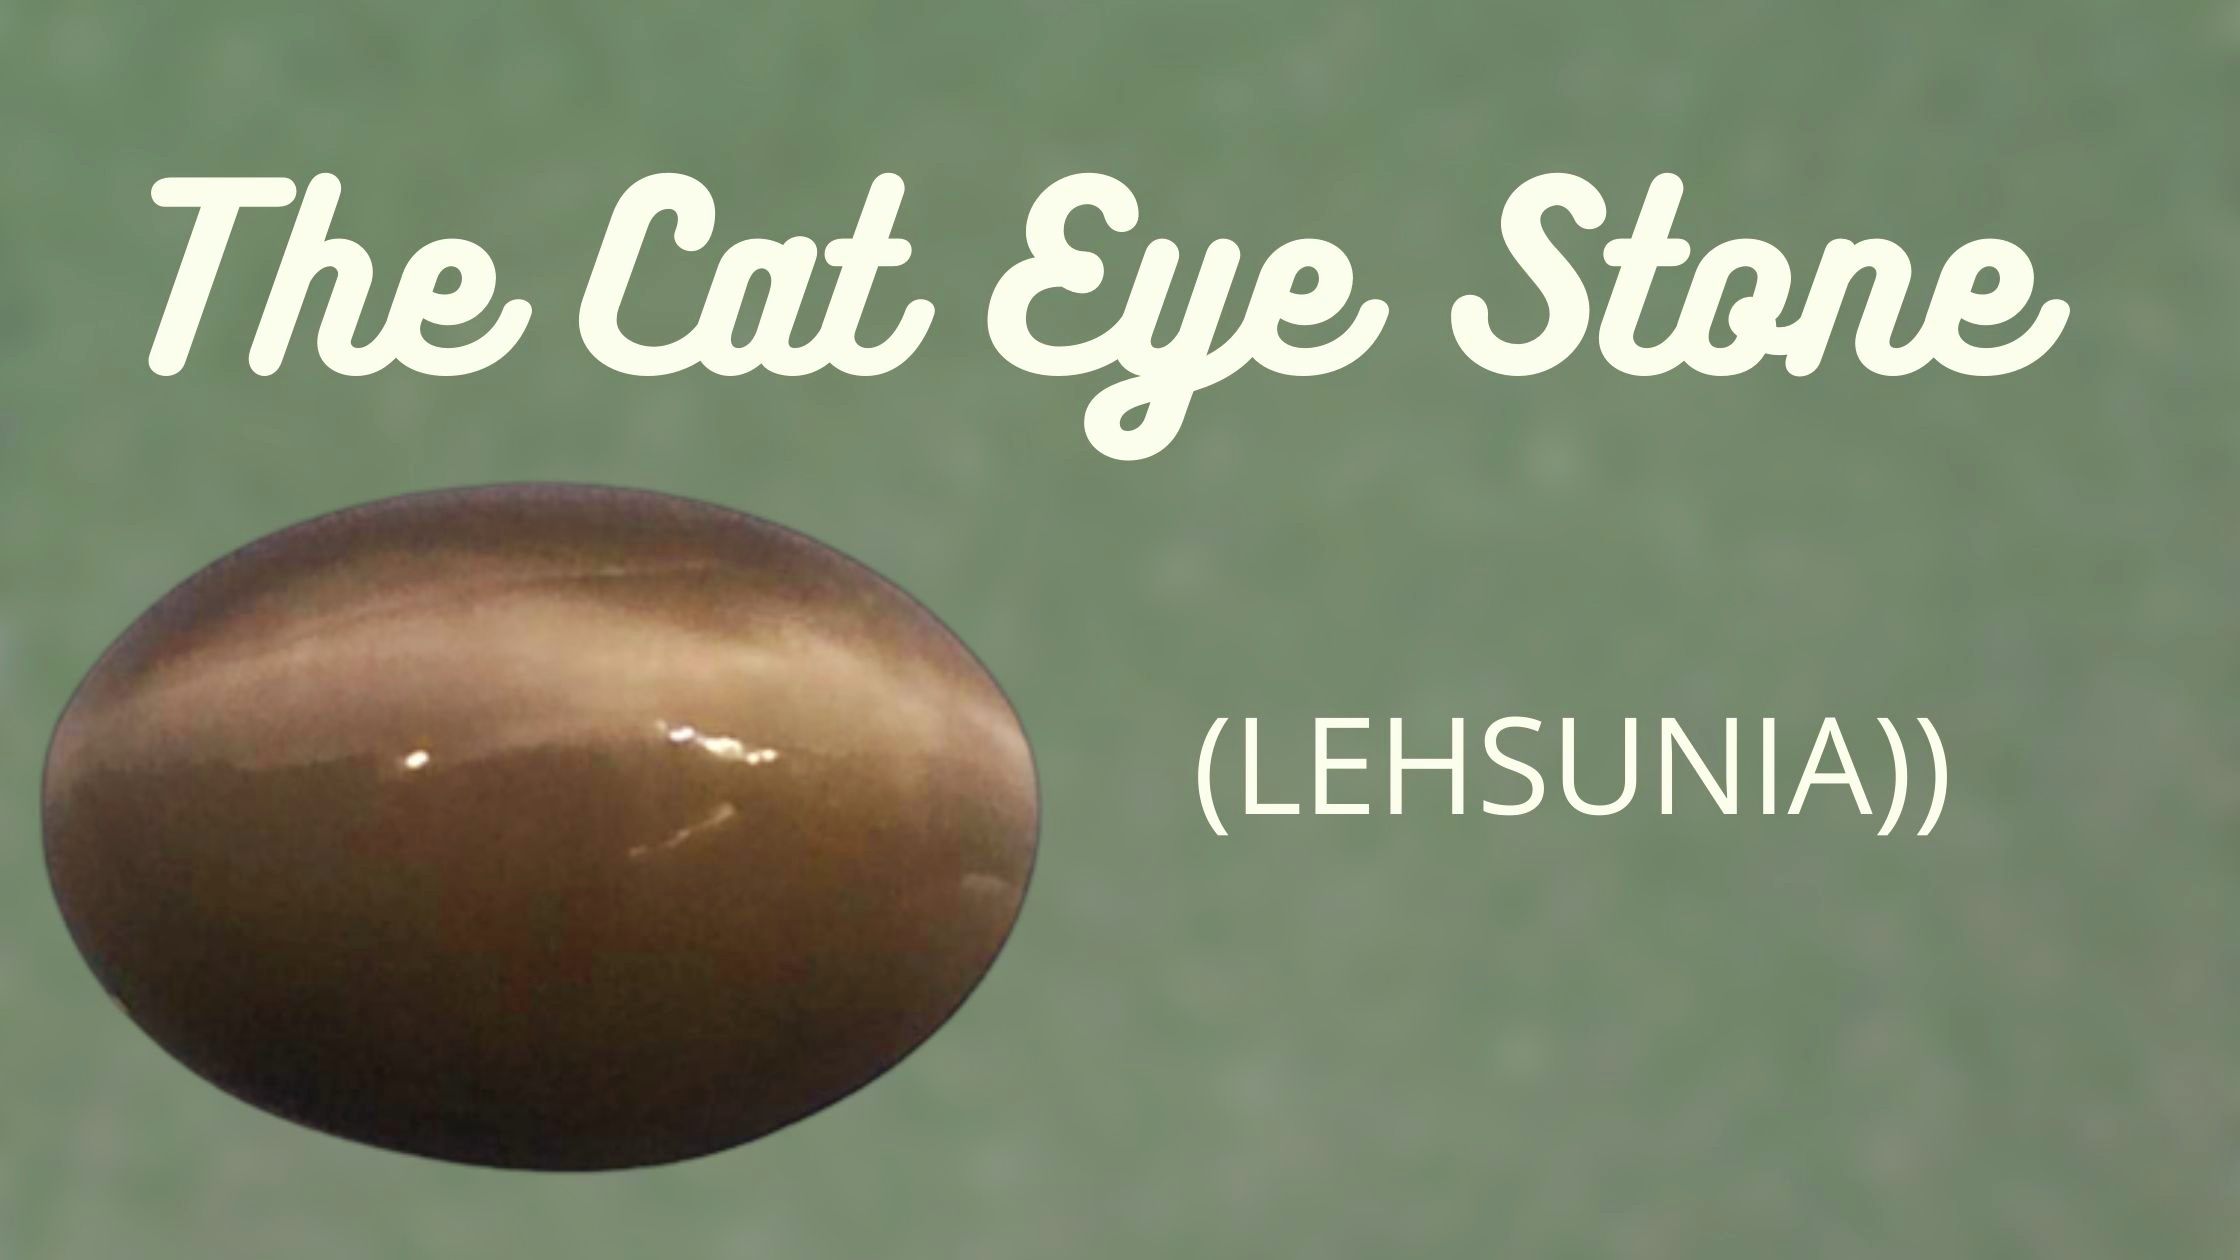 You are currently viewing THE CAT’S-EYE STONE (LEHSUNIA)